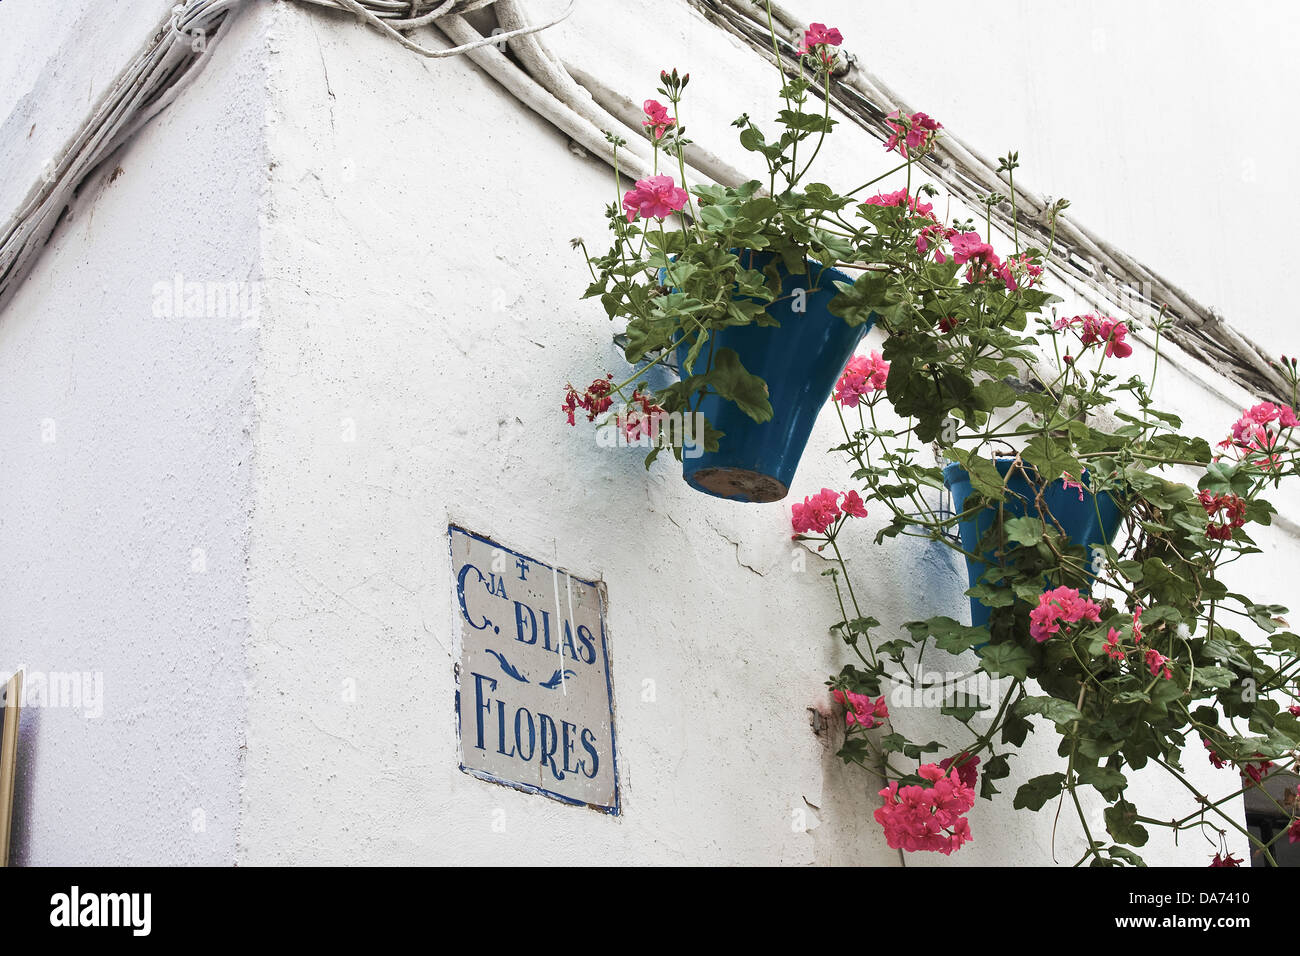 Traditional house decorated whit flowers pots in (Calle de las Flores)The patios 2013.Cordoba,Andalusia,Spain,Europe. Stock Photo